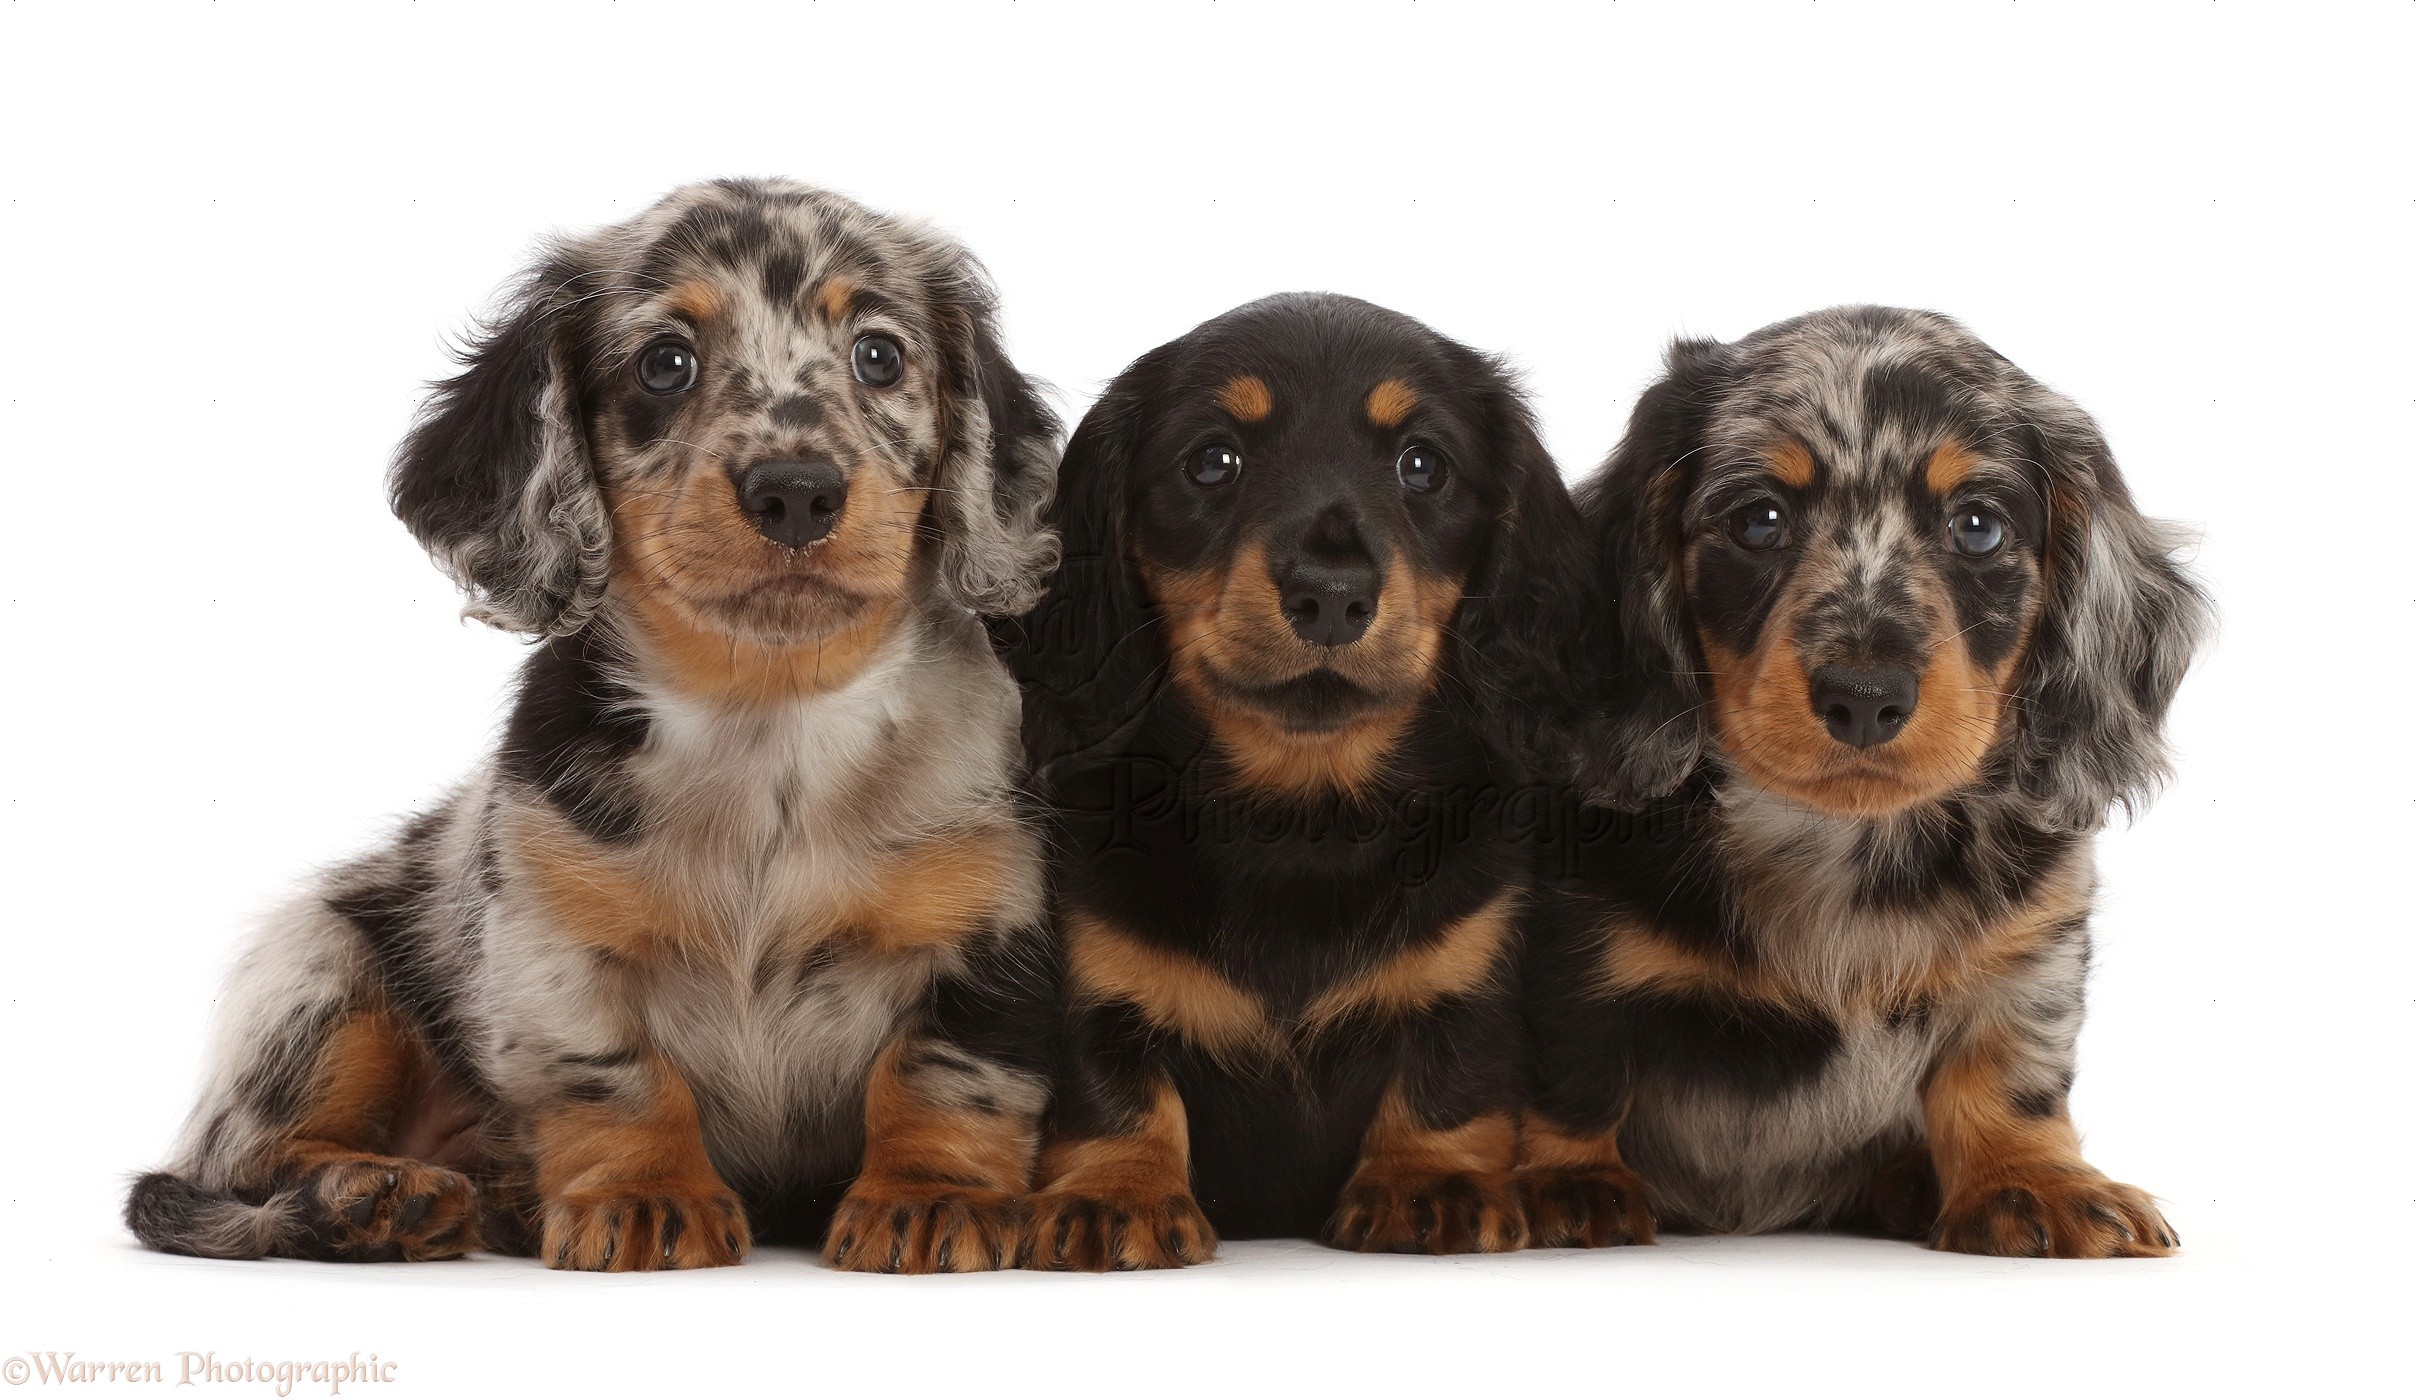 Dogs: Three Long-haired Dachshund puppies, 7 weeks old photo WP49210